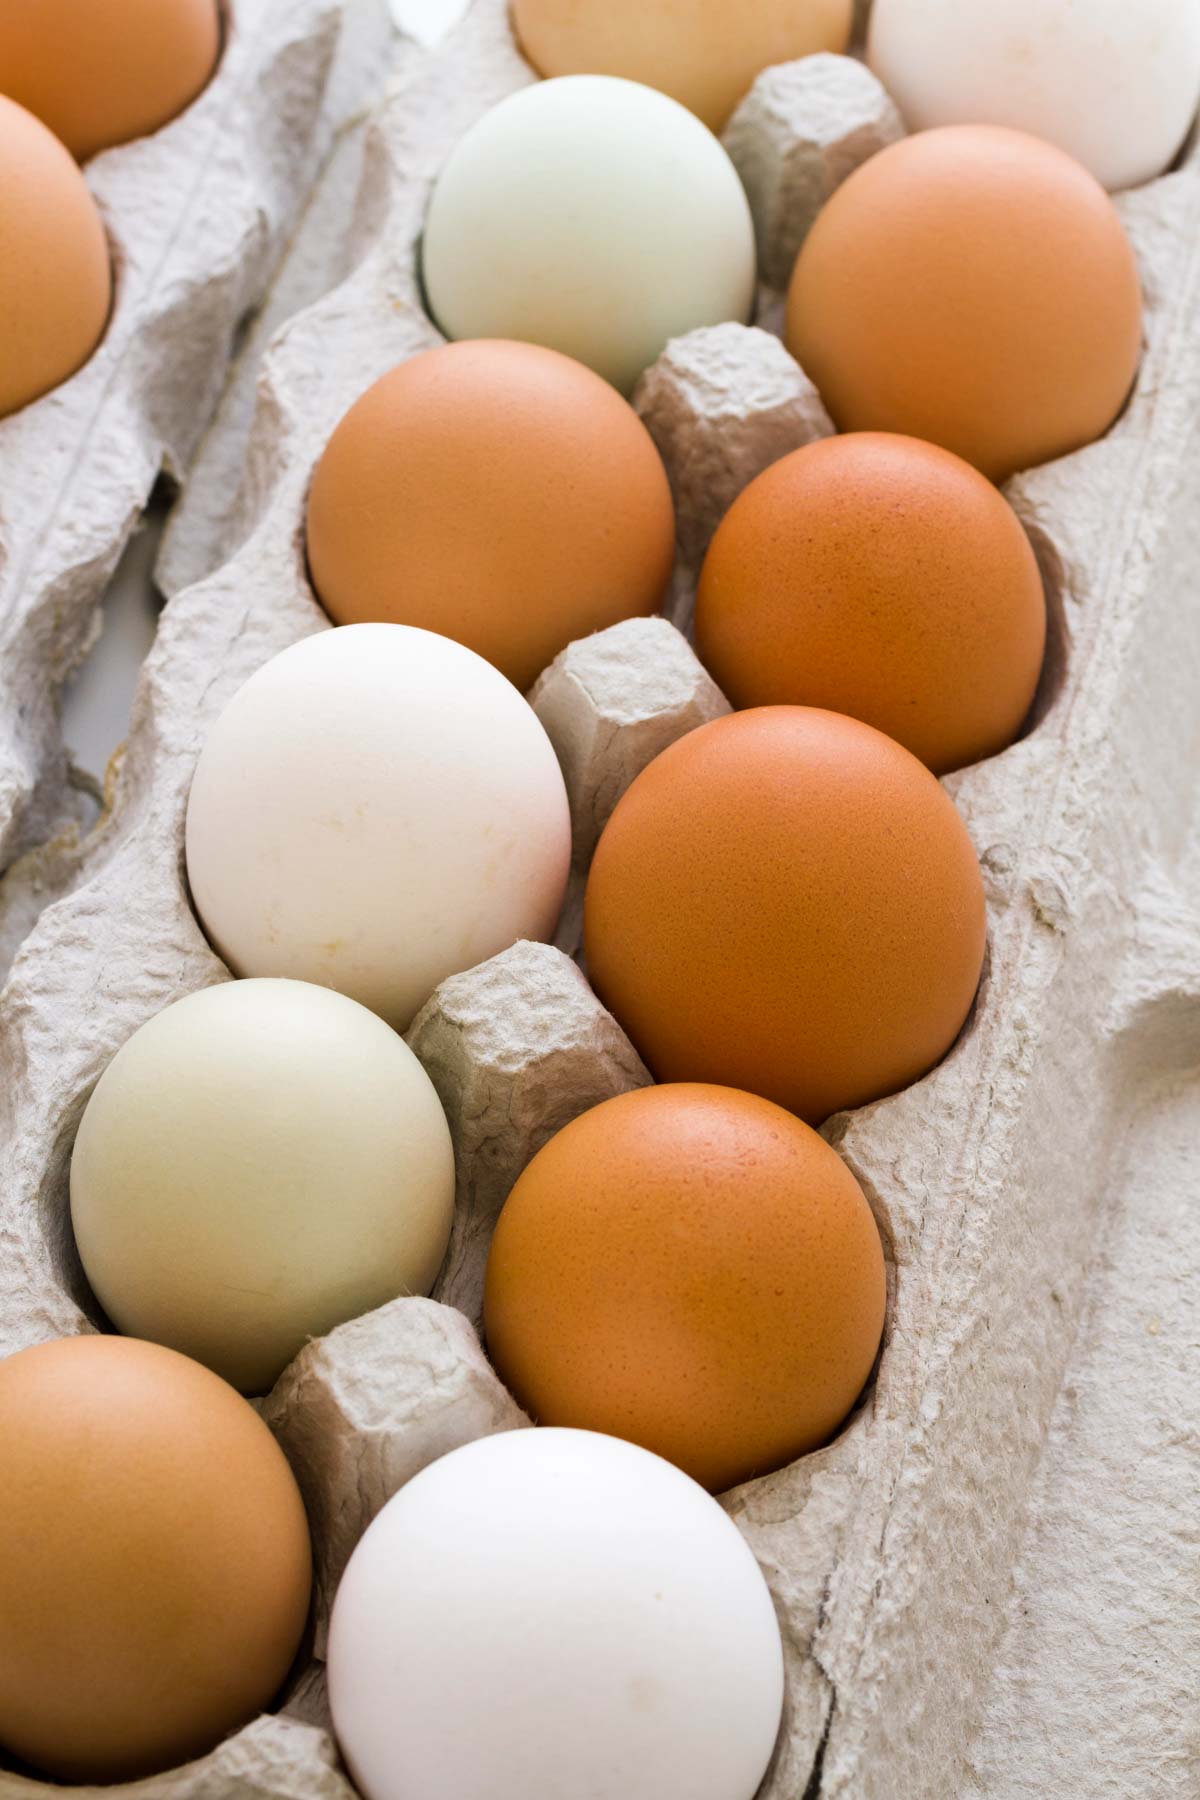 A carton of eggs, various colored eggs, including shades of brown, white, and pale green, arranged in a pattern.